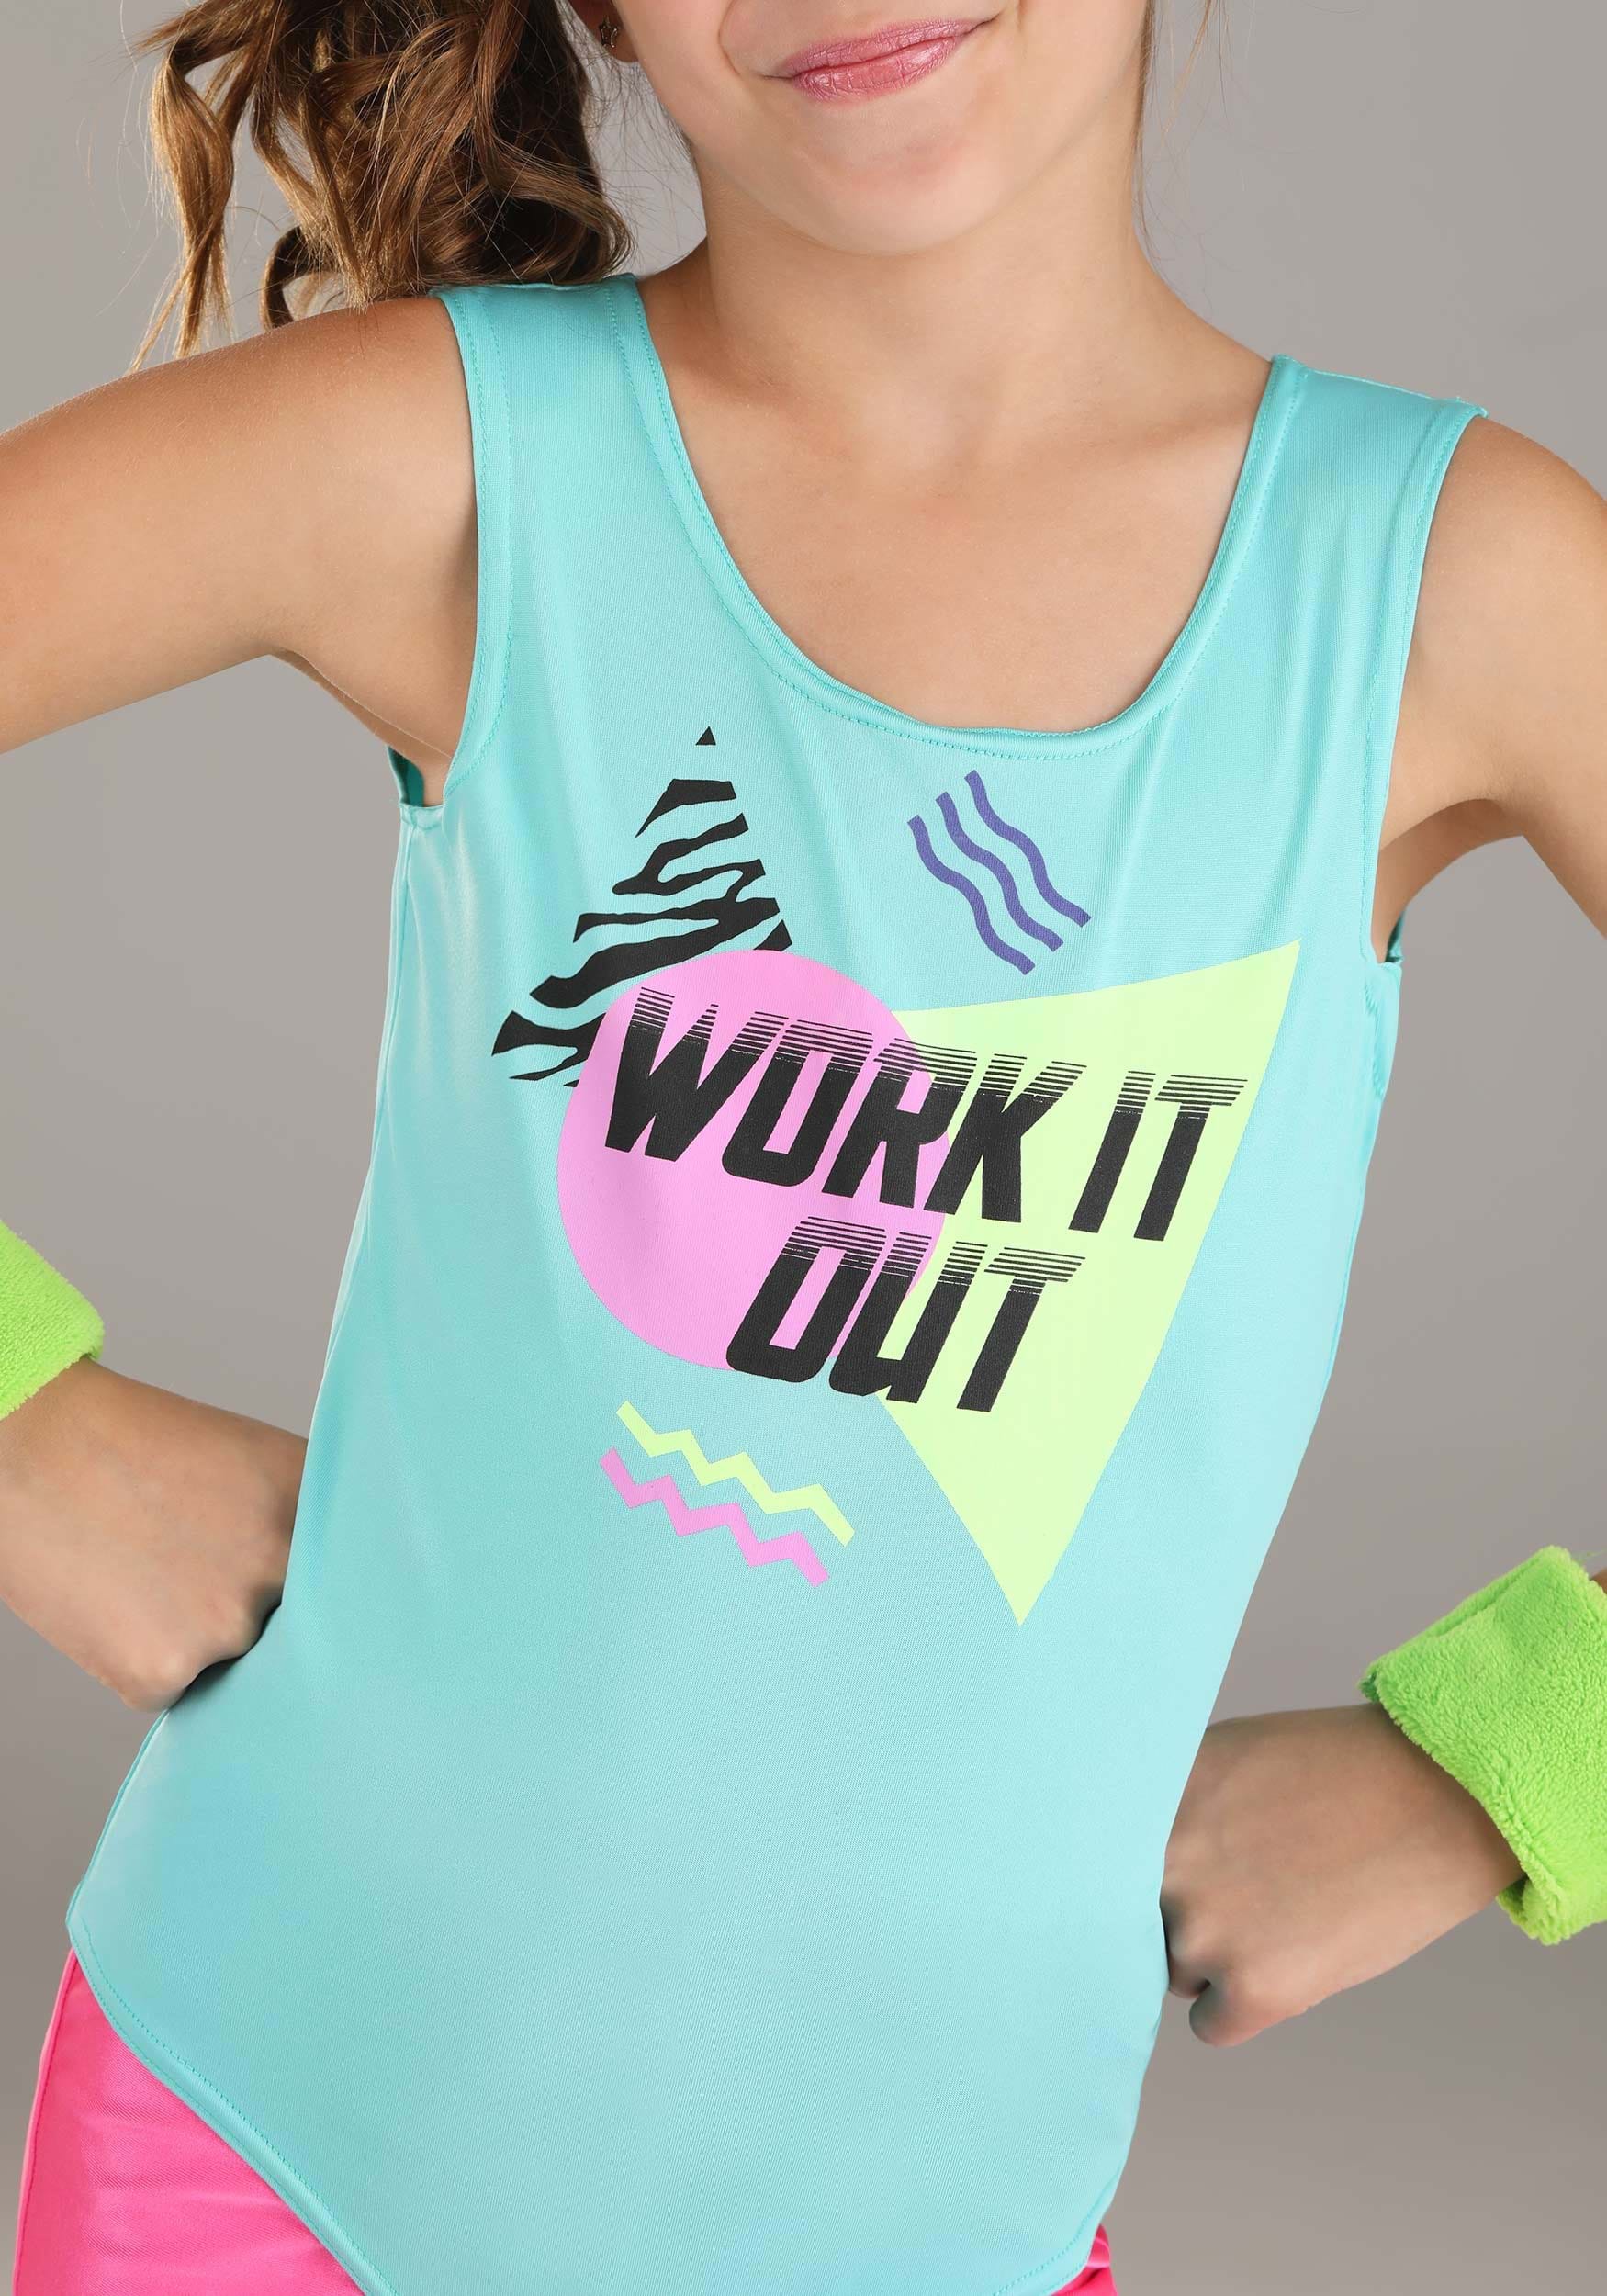 Girl's Totally 80s Workout Costume